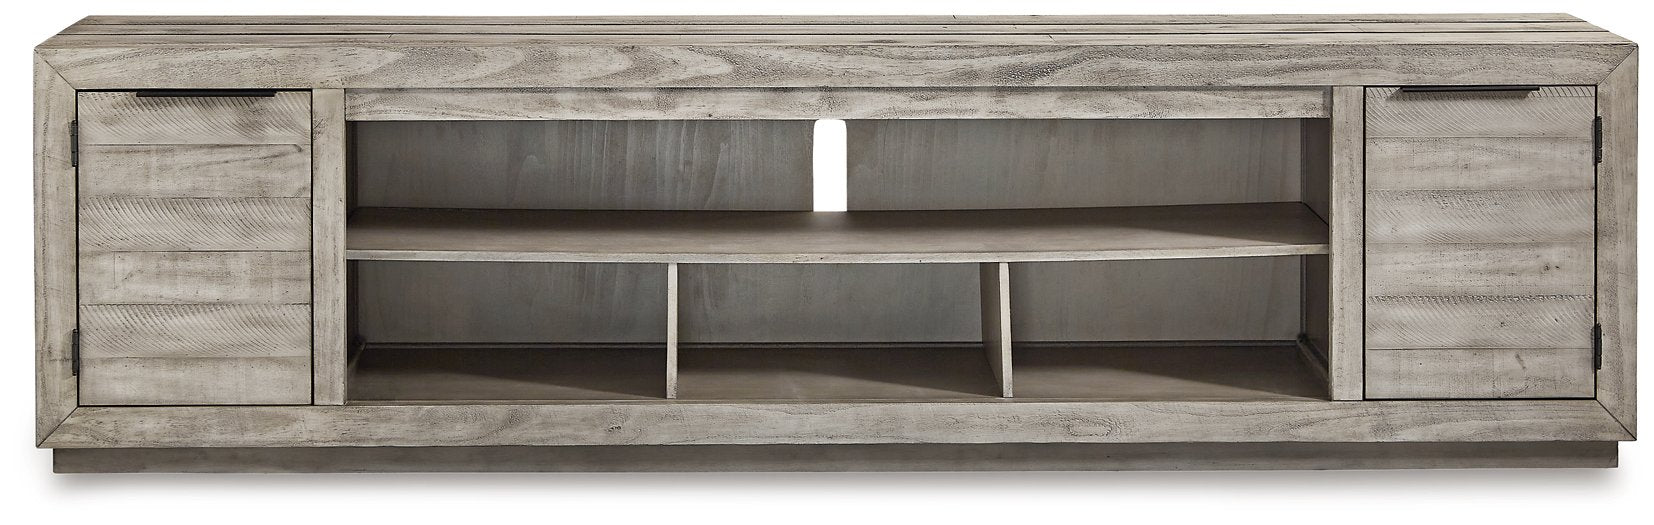 Naydell 92" TV Stand with Electric Fireplace - Tallahassee Discount Furniture (FL)